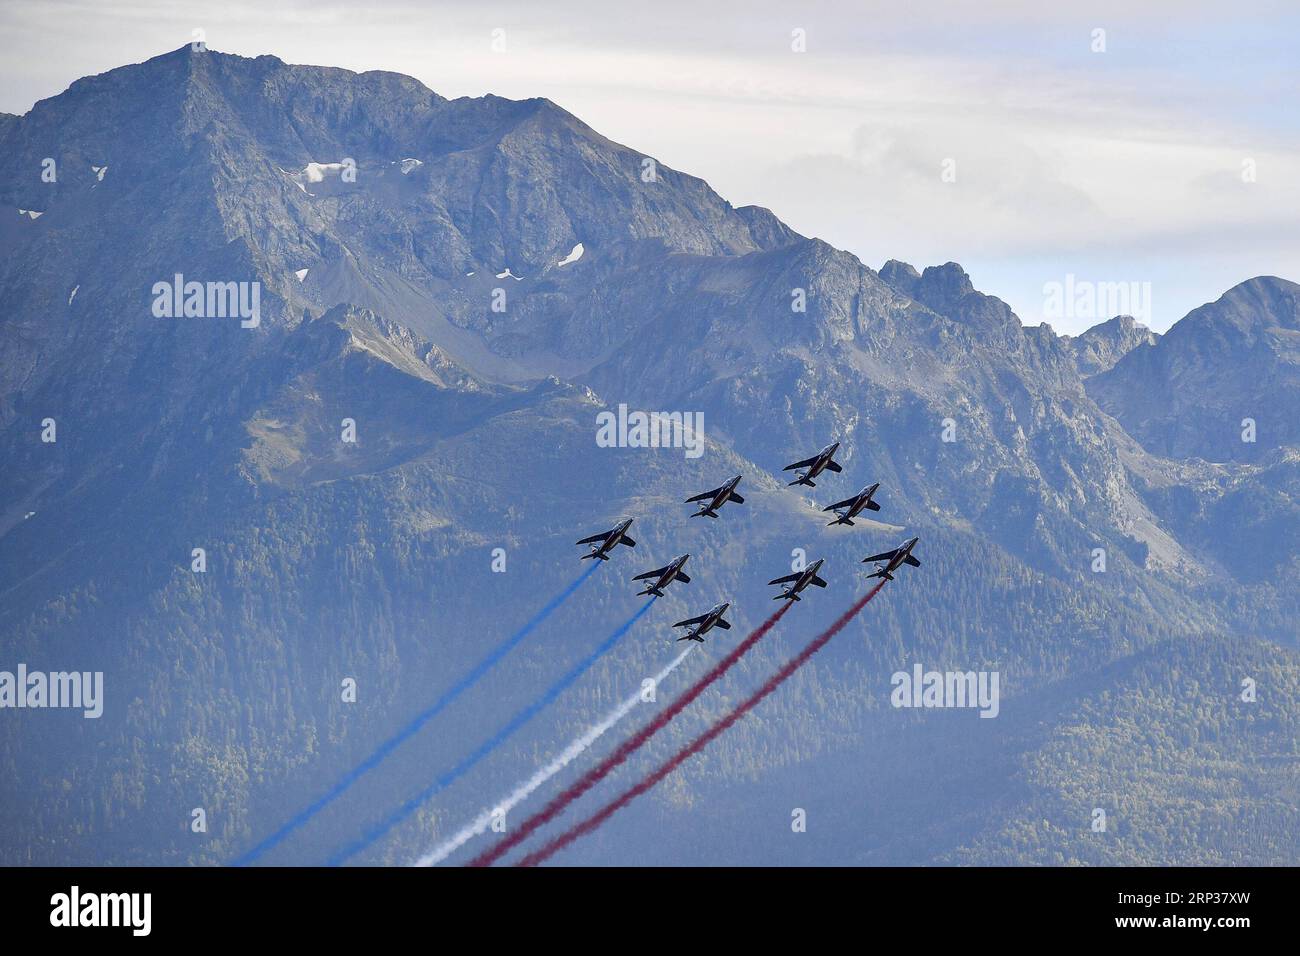 (180924) -- SAINT-HILAIRE, Sept. 24, 2018 (Xinhua) -- Photo taken on Sept. 22, 2018 shows a show of Patrouille de France in Saint-Hilaire, France. The four-day air sports festival, Coupe Icare, concluded on Sunday. On its 45th edition, the Coupe Icare this year attracted about 700 accredited pilots and over 90,000 spectators. (Xinhua/Chen Yichen) (SP)FRANCE-SAINT-HILAIRE-AIR SPORTS-45TH COUPE ICARE PUBLICATIONxNOTxINxCHN Stock Photo